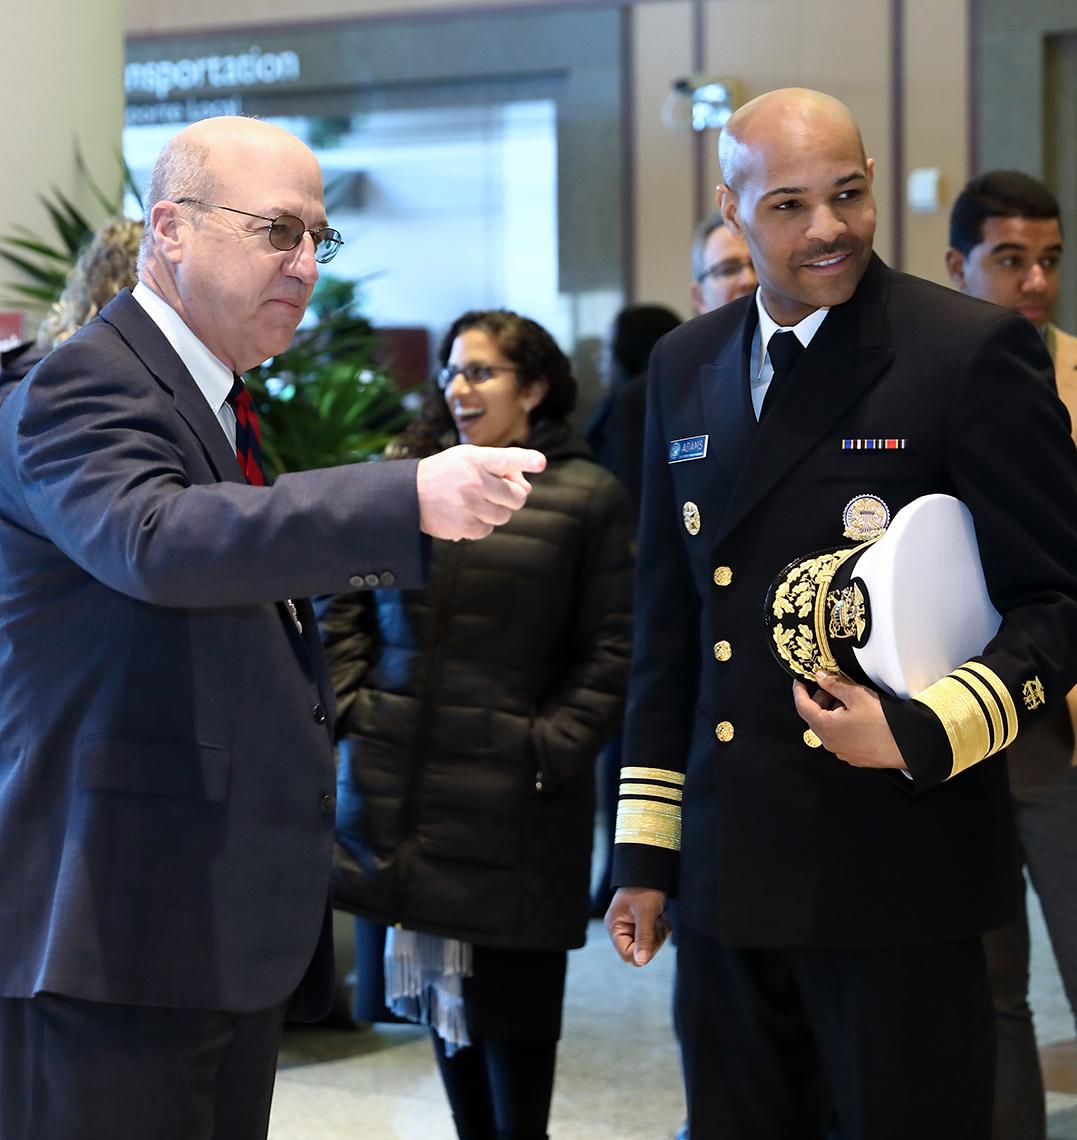 Dr. Gilman chats with U.S. surgeon general Dr. Adams in Clinical Center lobby